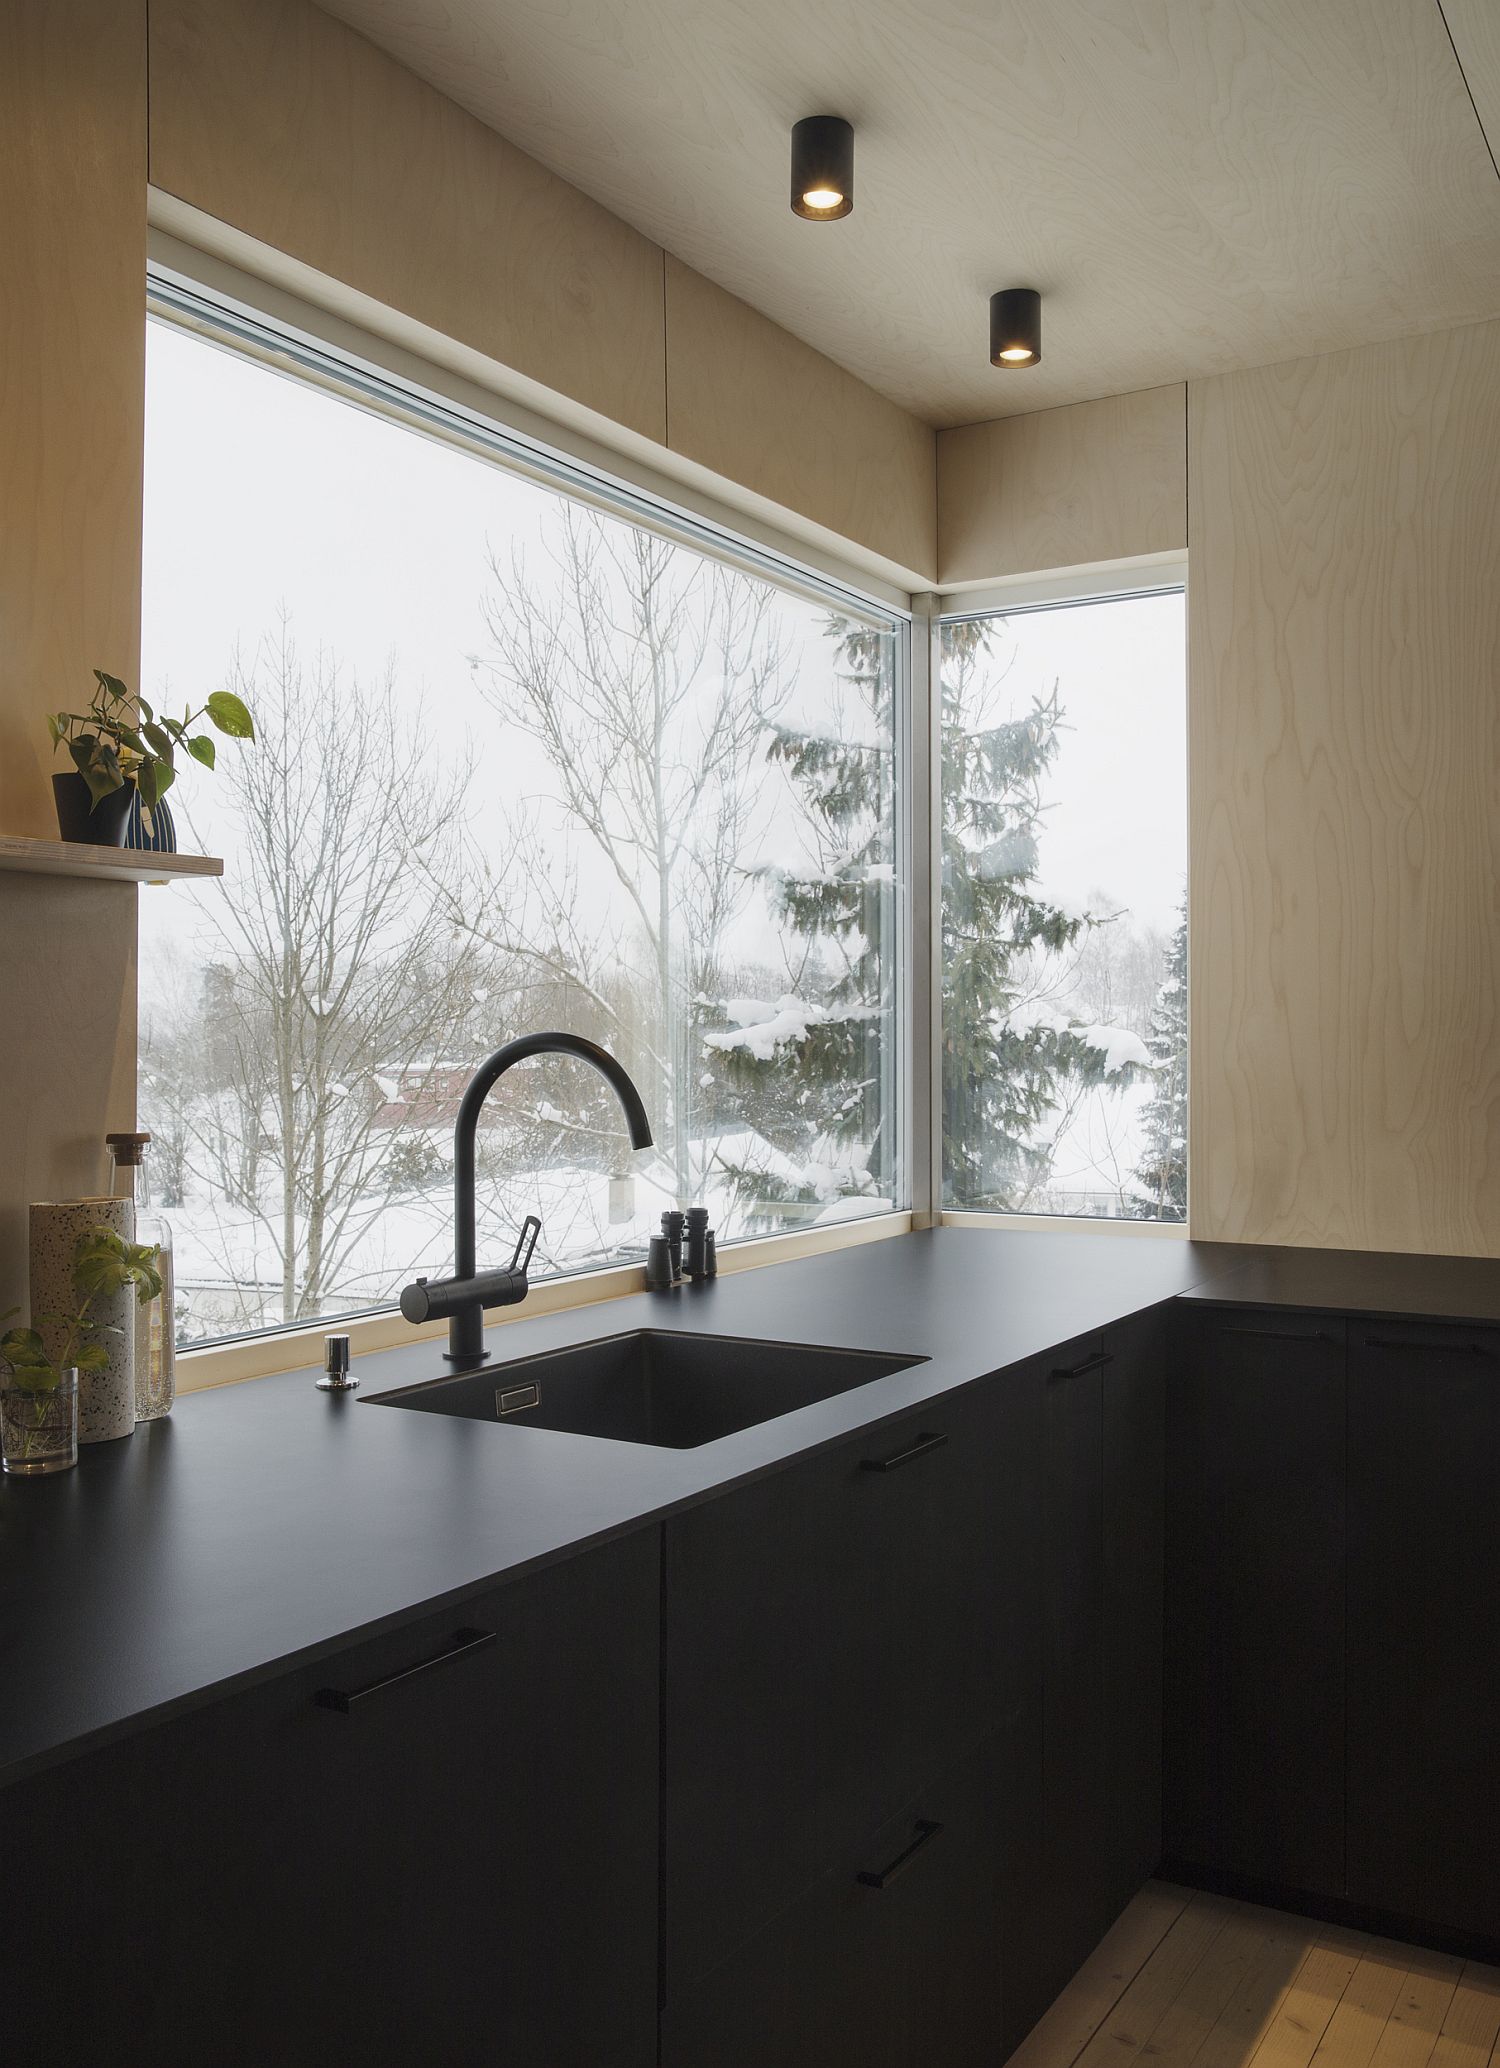 Corner window in the kitchen brings in ample natural light